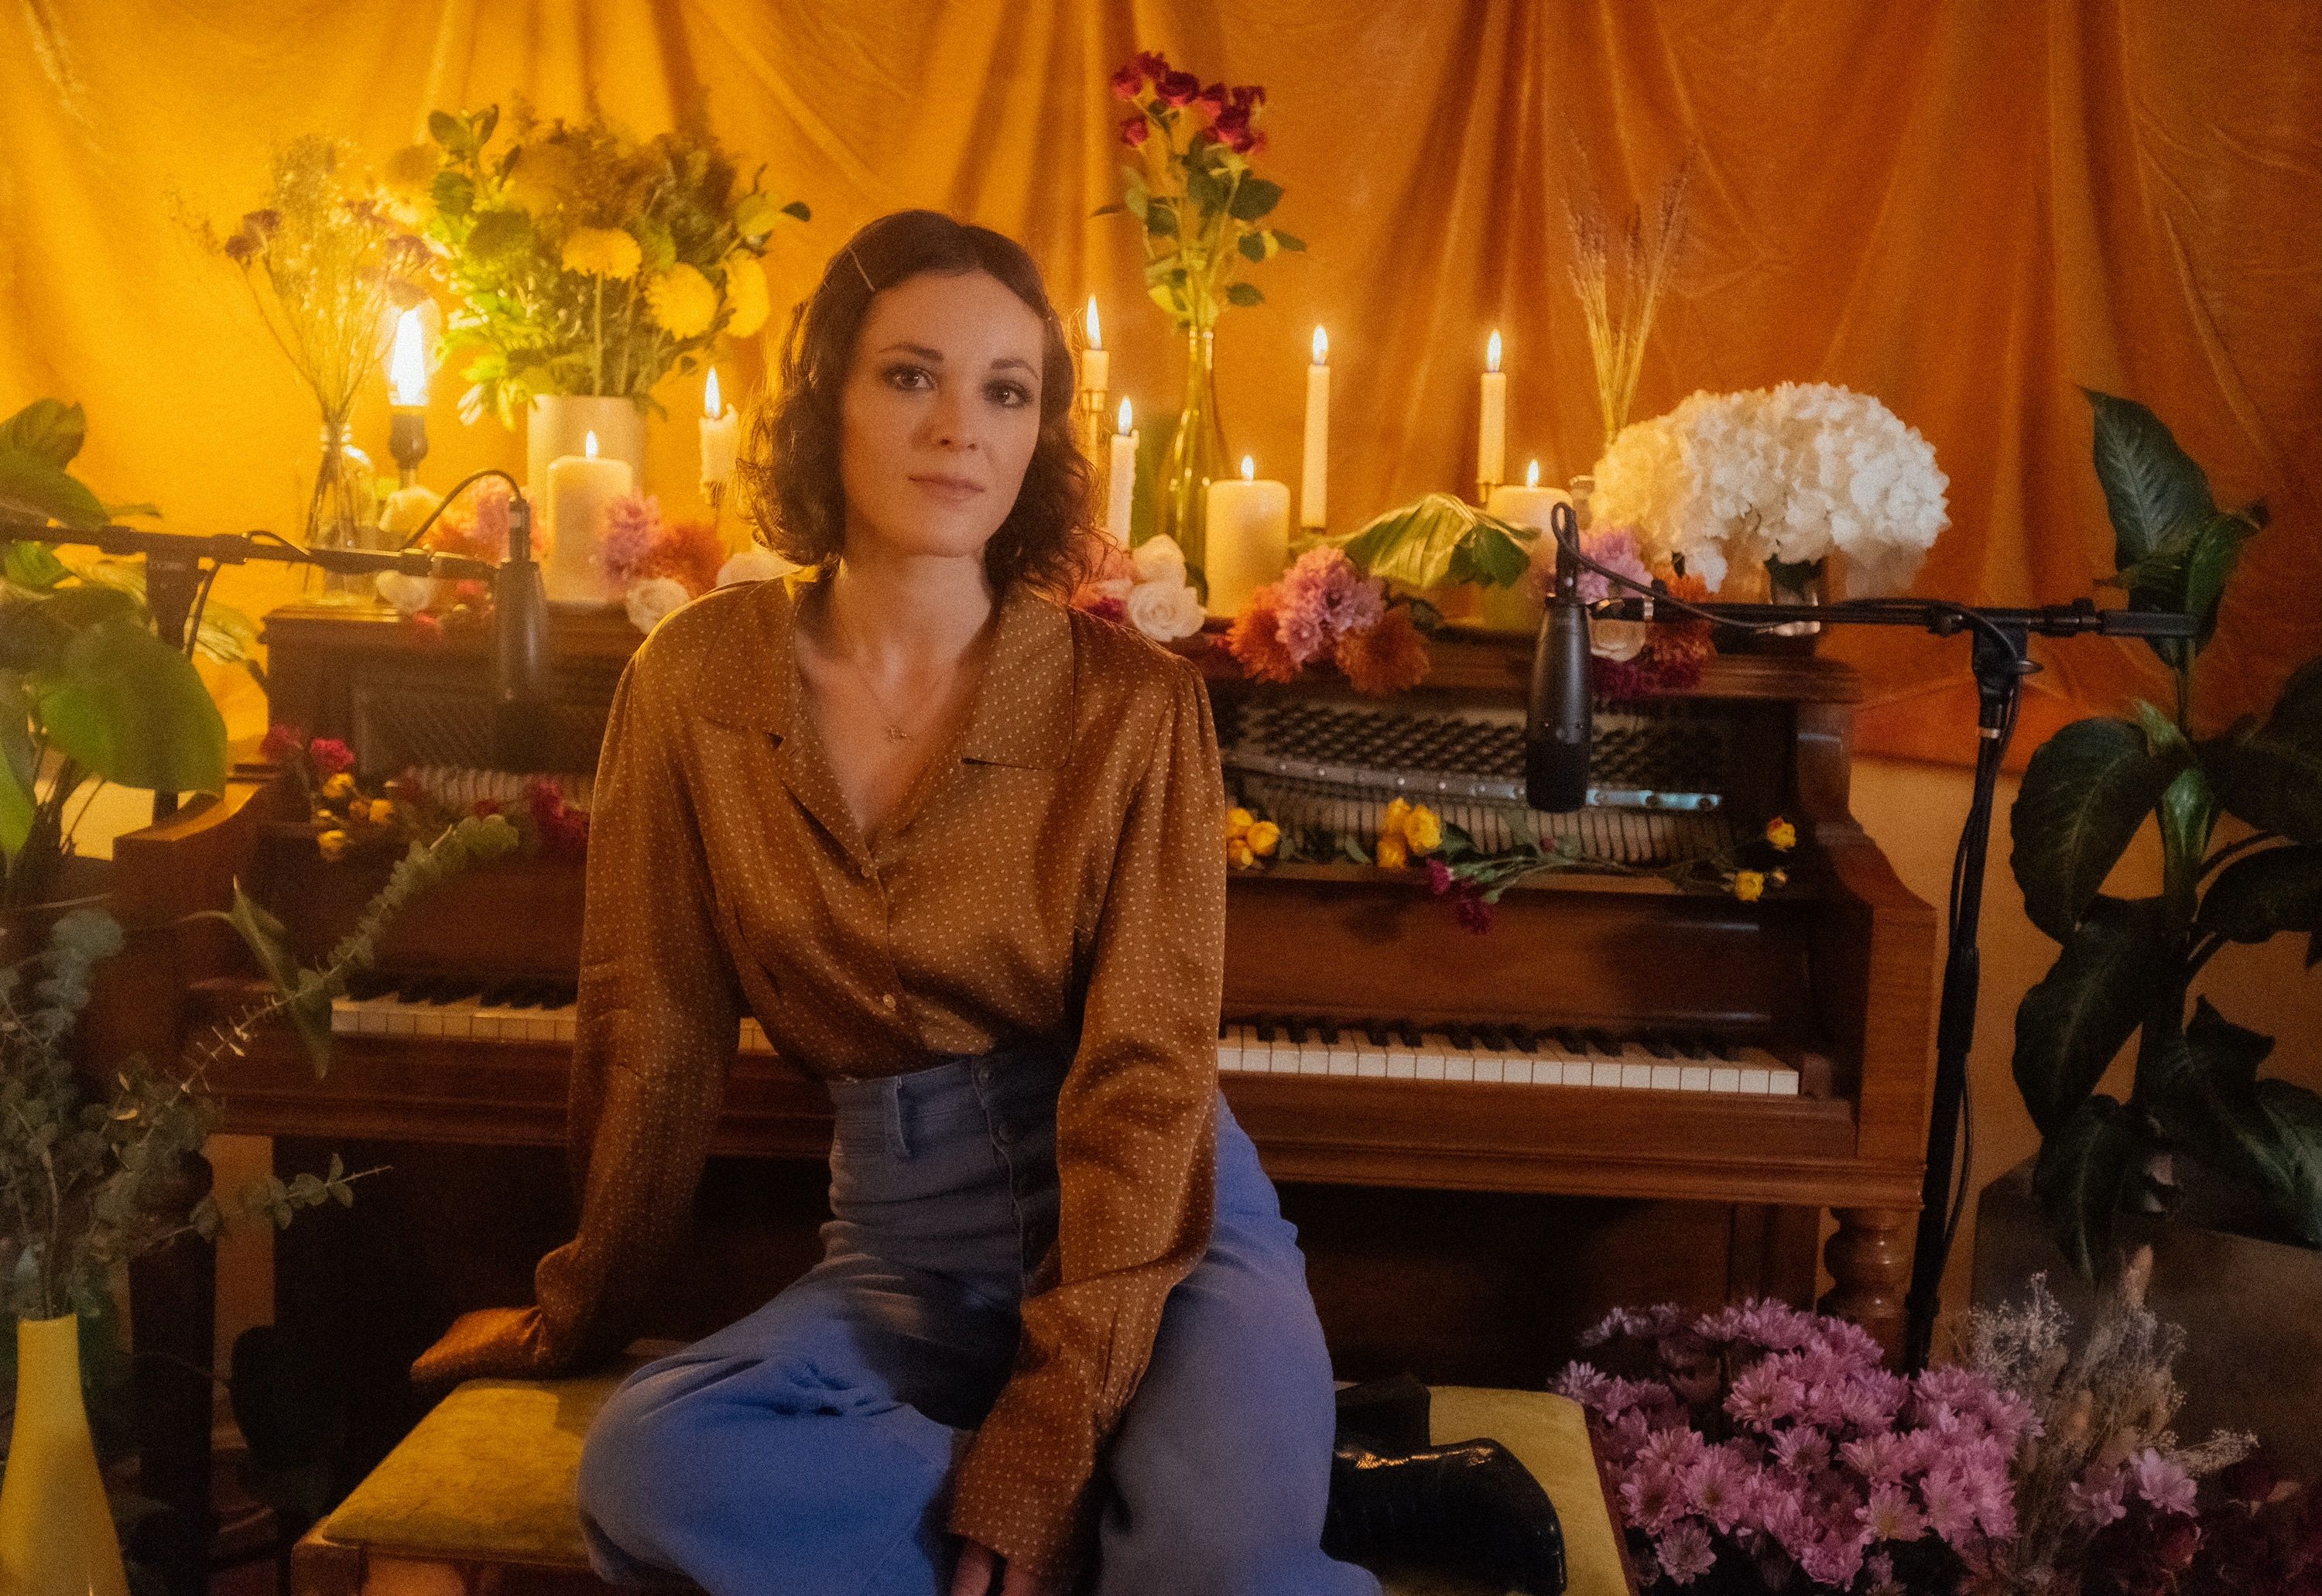 Jillian Jacqueline Provides an Offering of Peace in Exclusive Live Performance Video of “Wait for the Light”